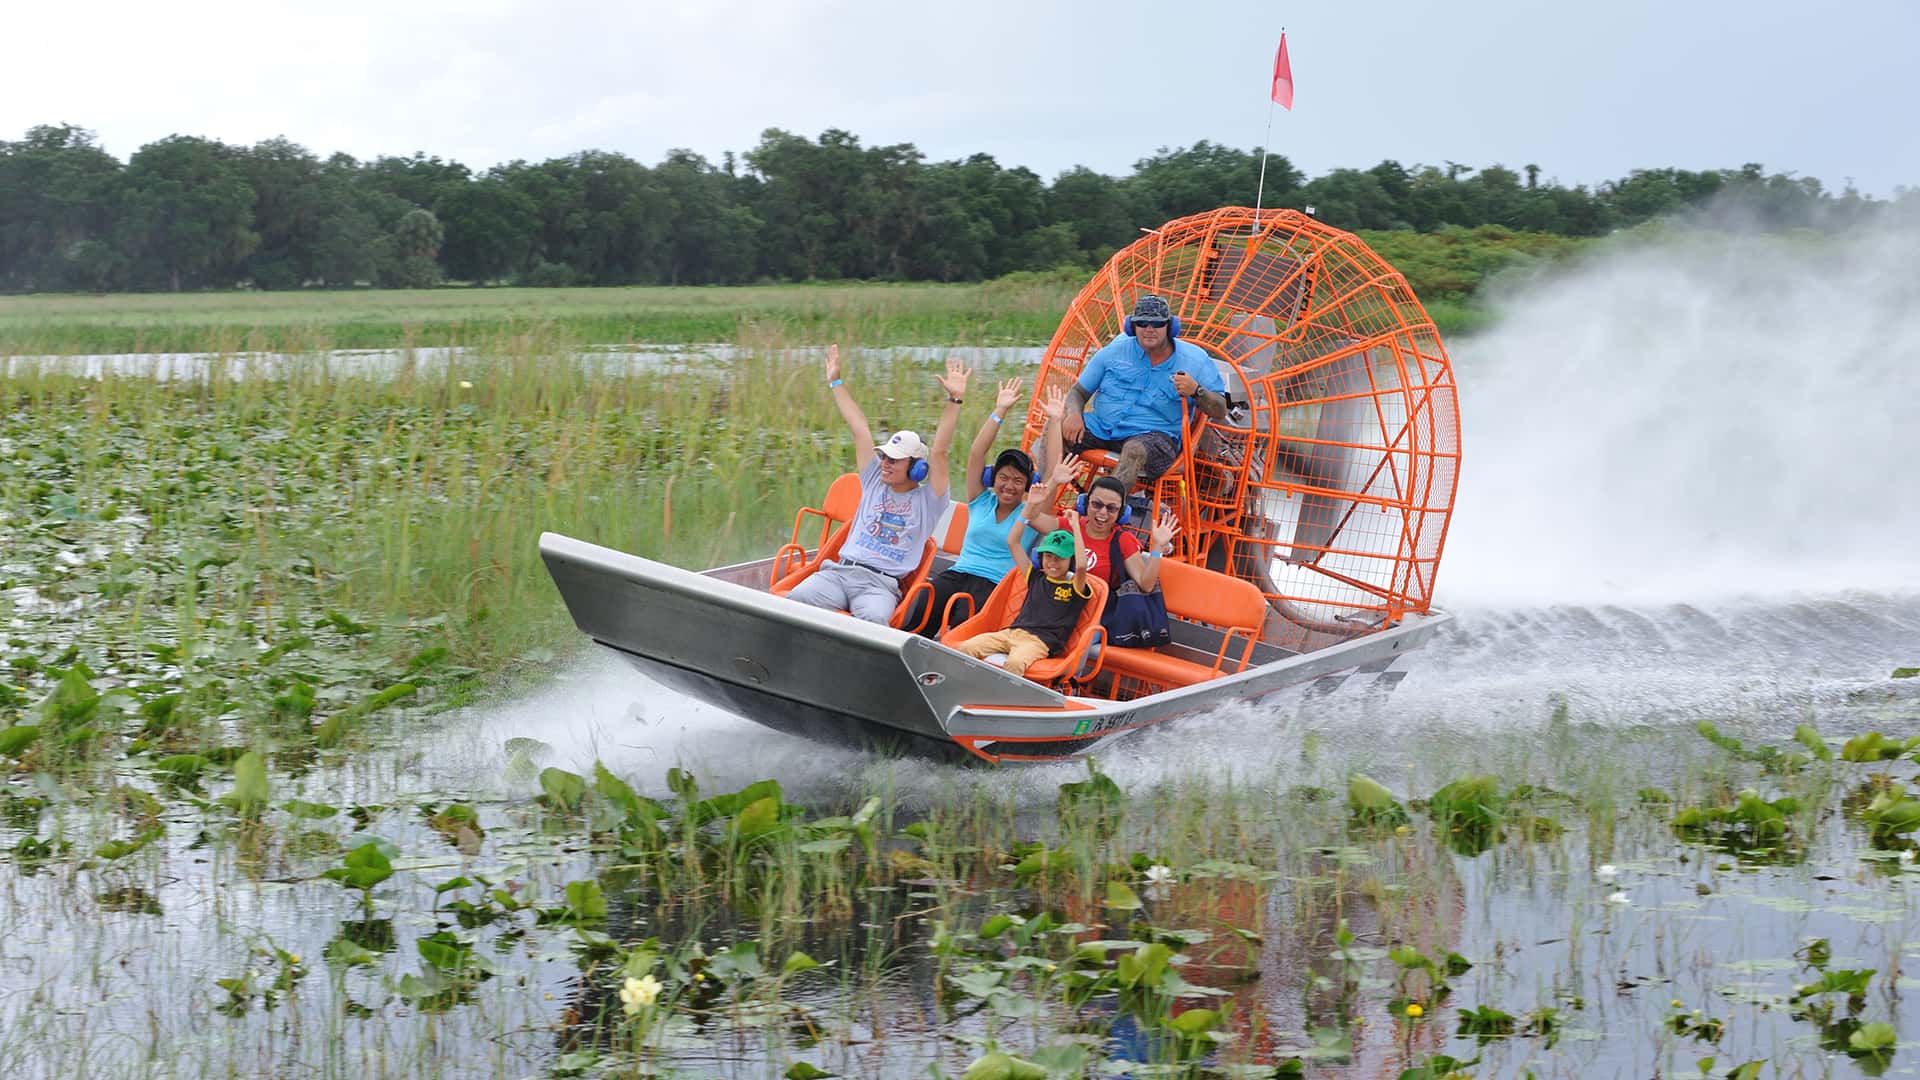 VIP or Private airboat ride 3